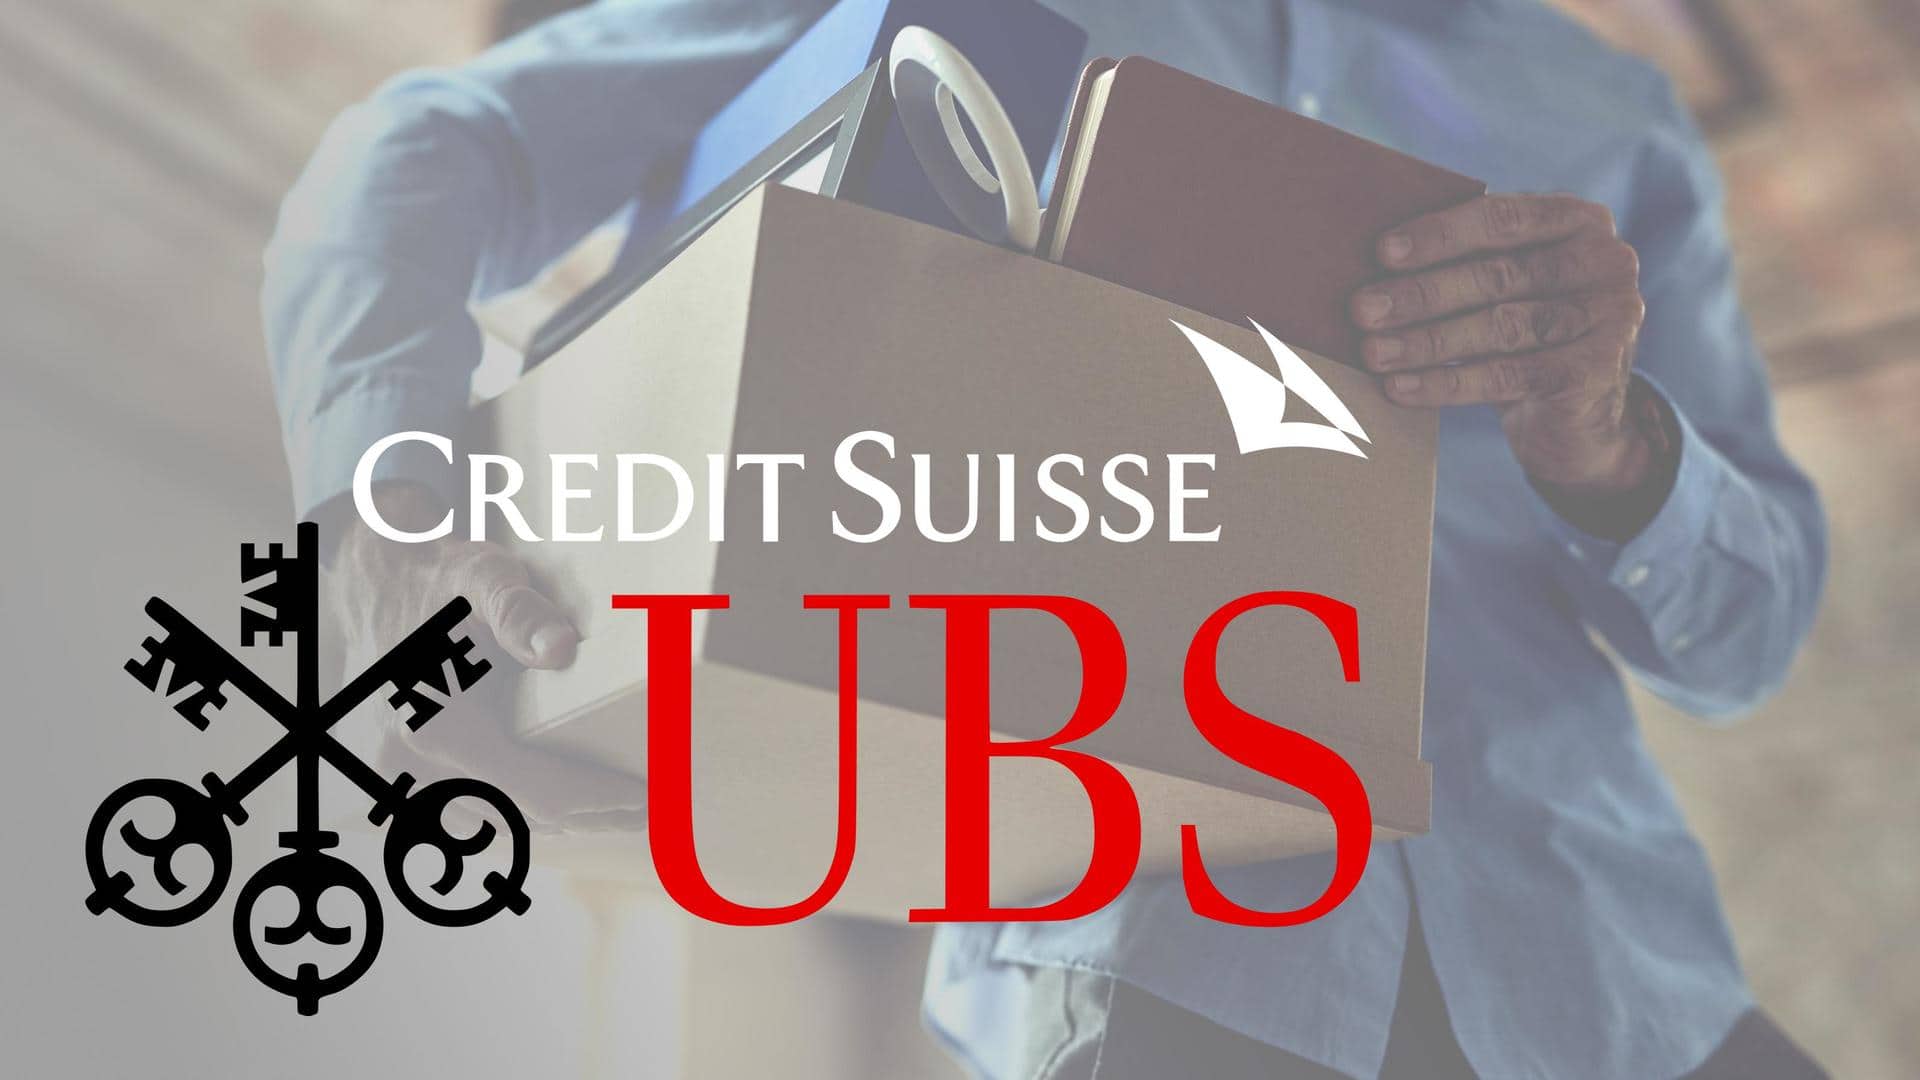 UBS to fire over 20,000 Credit Suisse employees